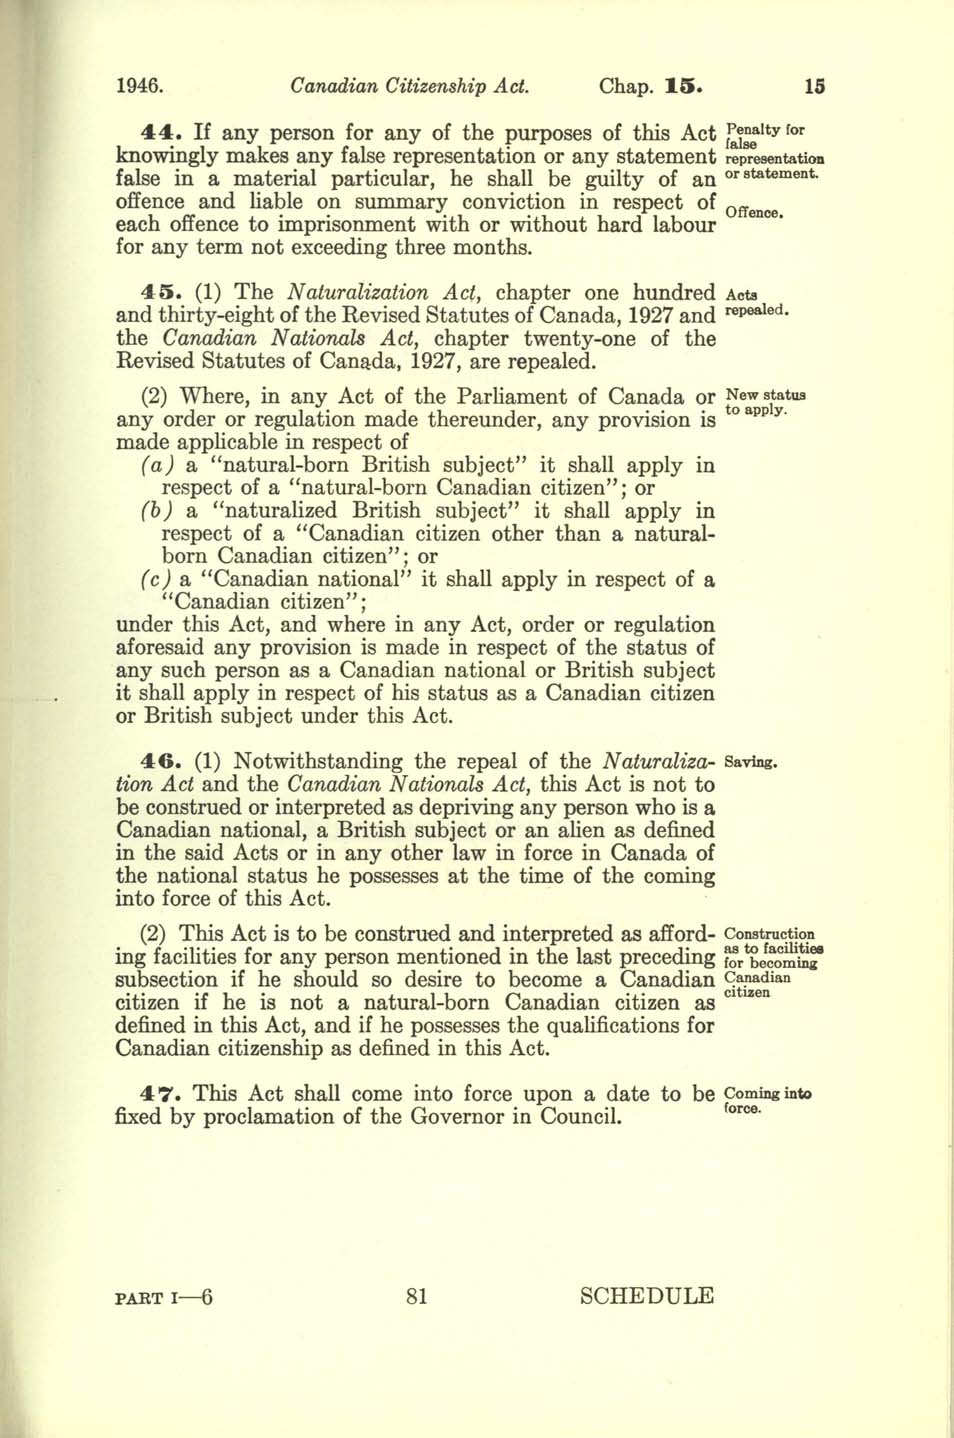 Chap 15 Page 81 Canadian Citizenship Act, 1947